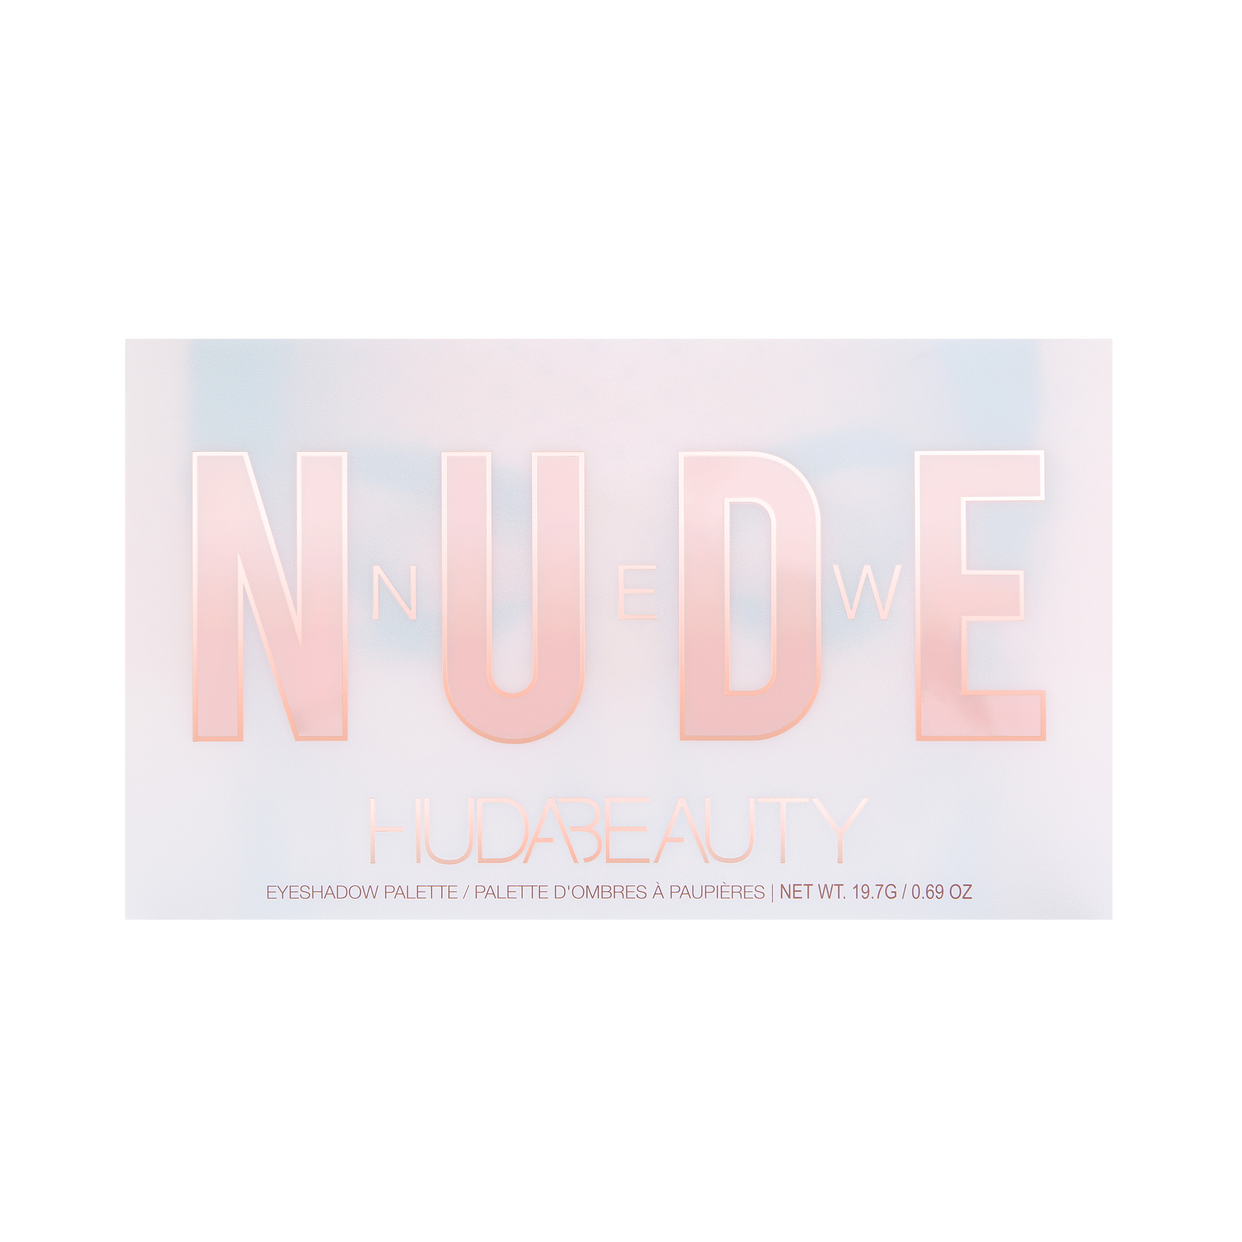 The New Nude